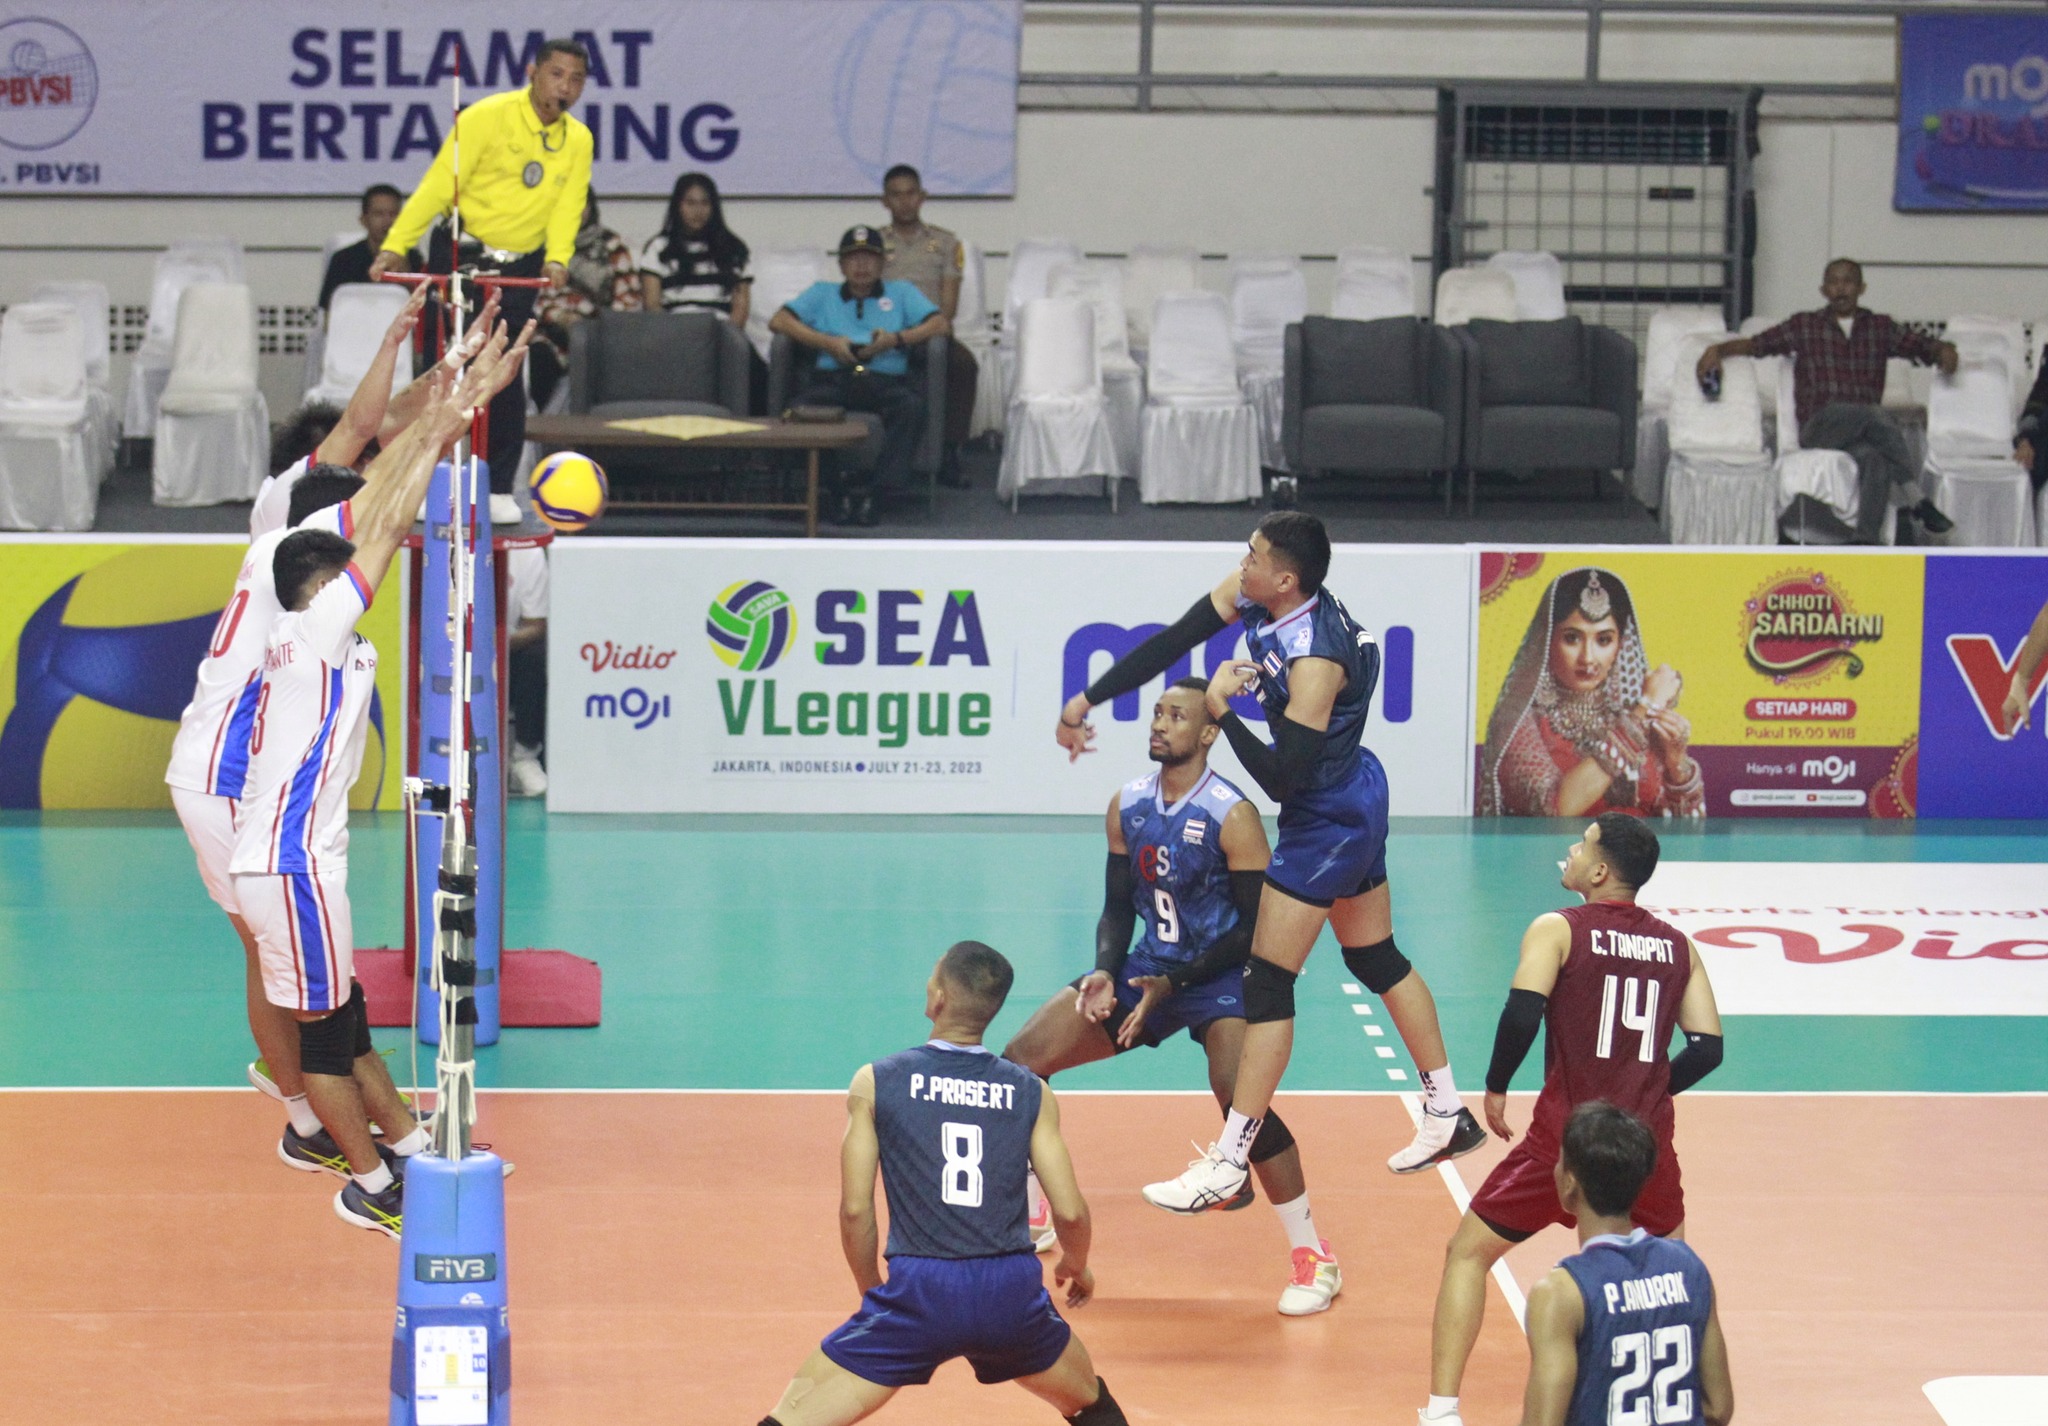 THAILAND AND INDONESIA MAKE IT TWO IN SUCCESSION TO CLASH FOR SEA V